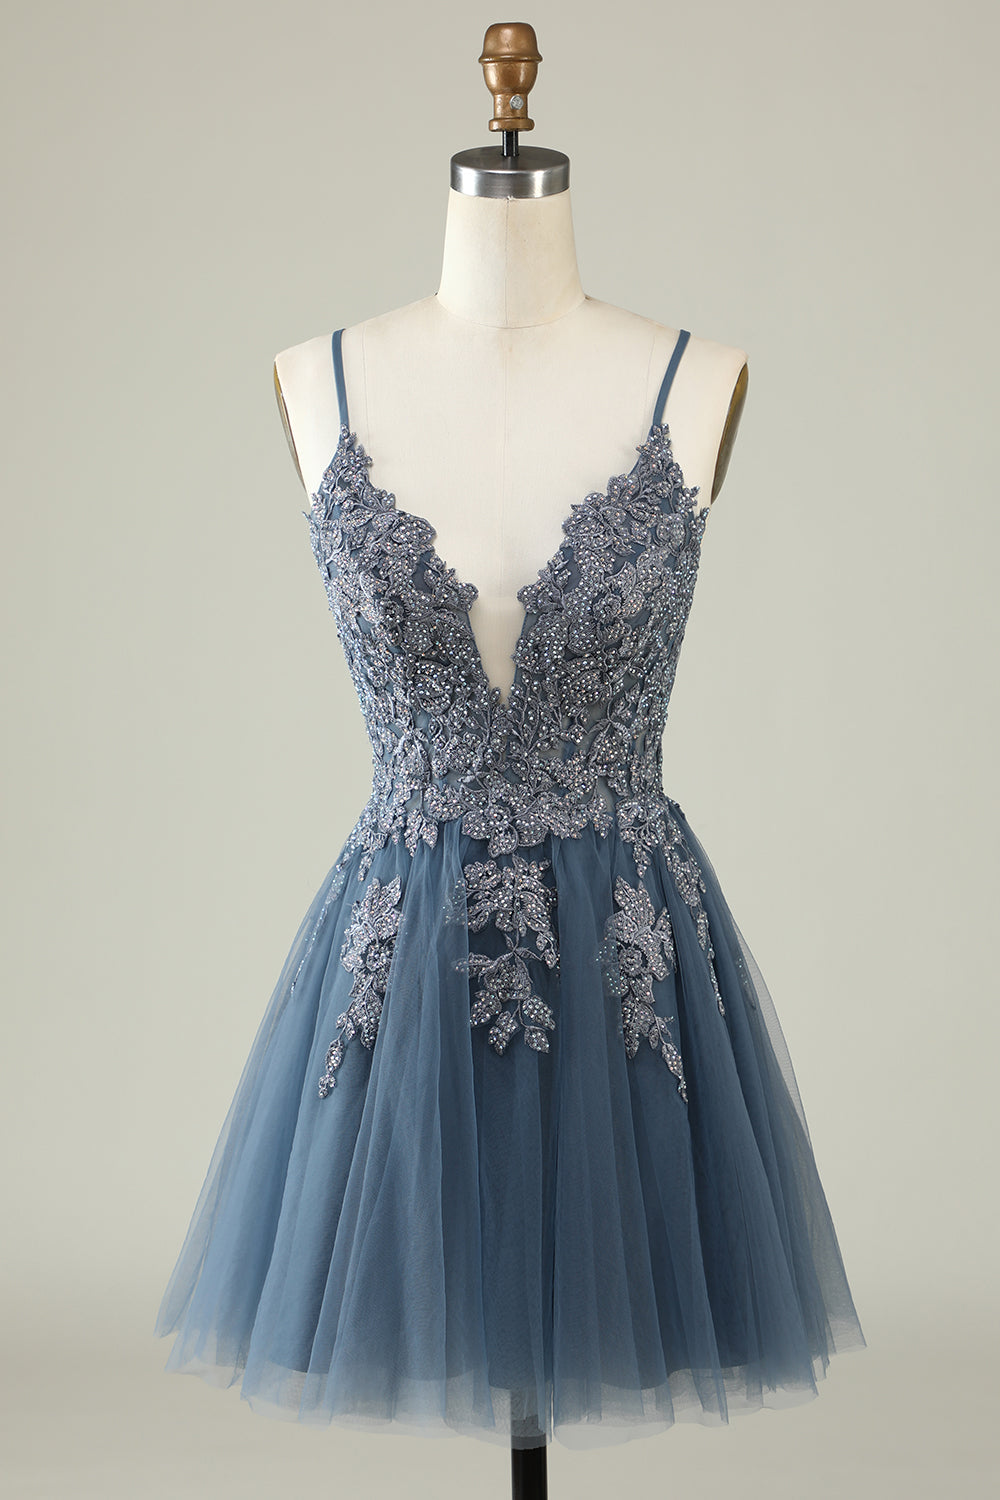 Simple Spaghetti Straps Tulle Vintage Homecoming Dress with Lace Appliques